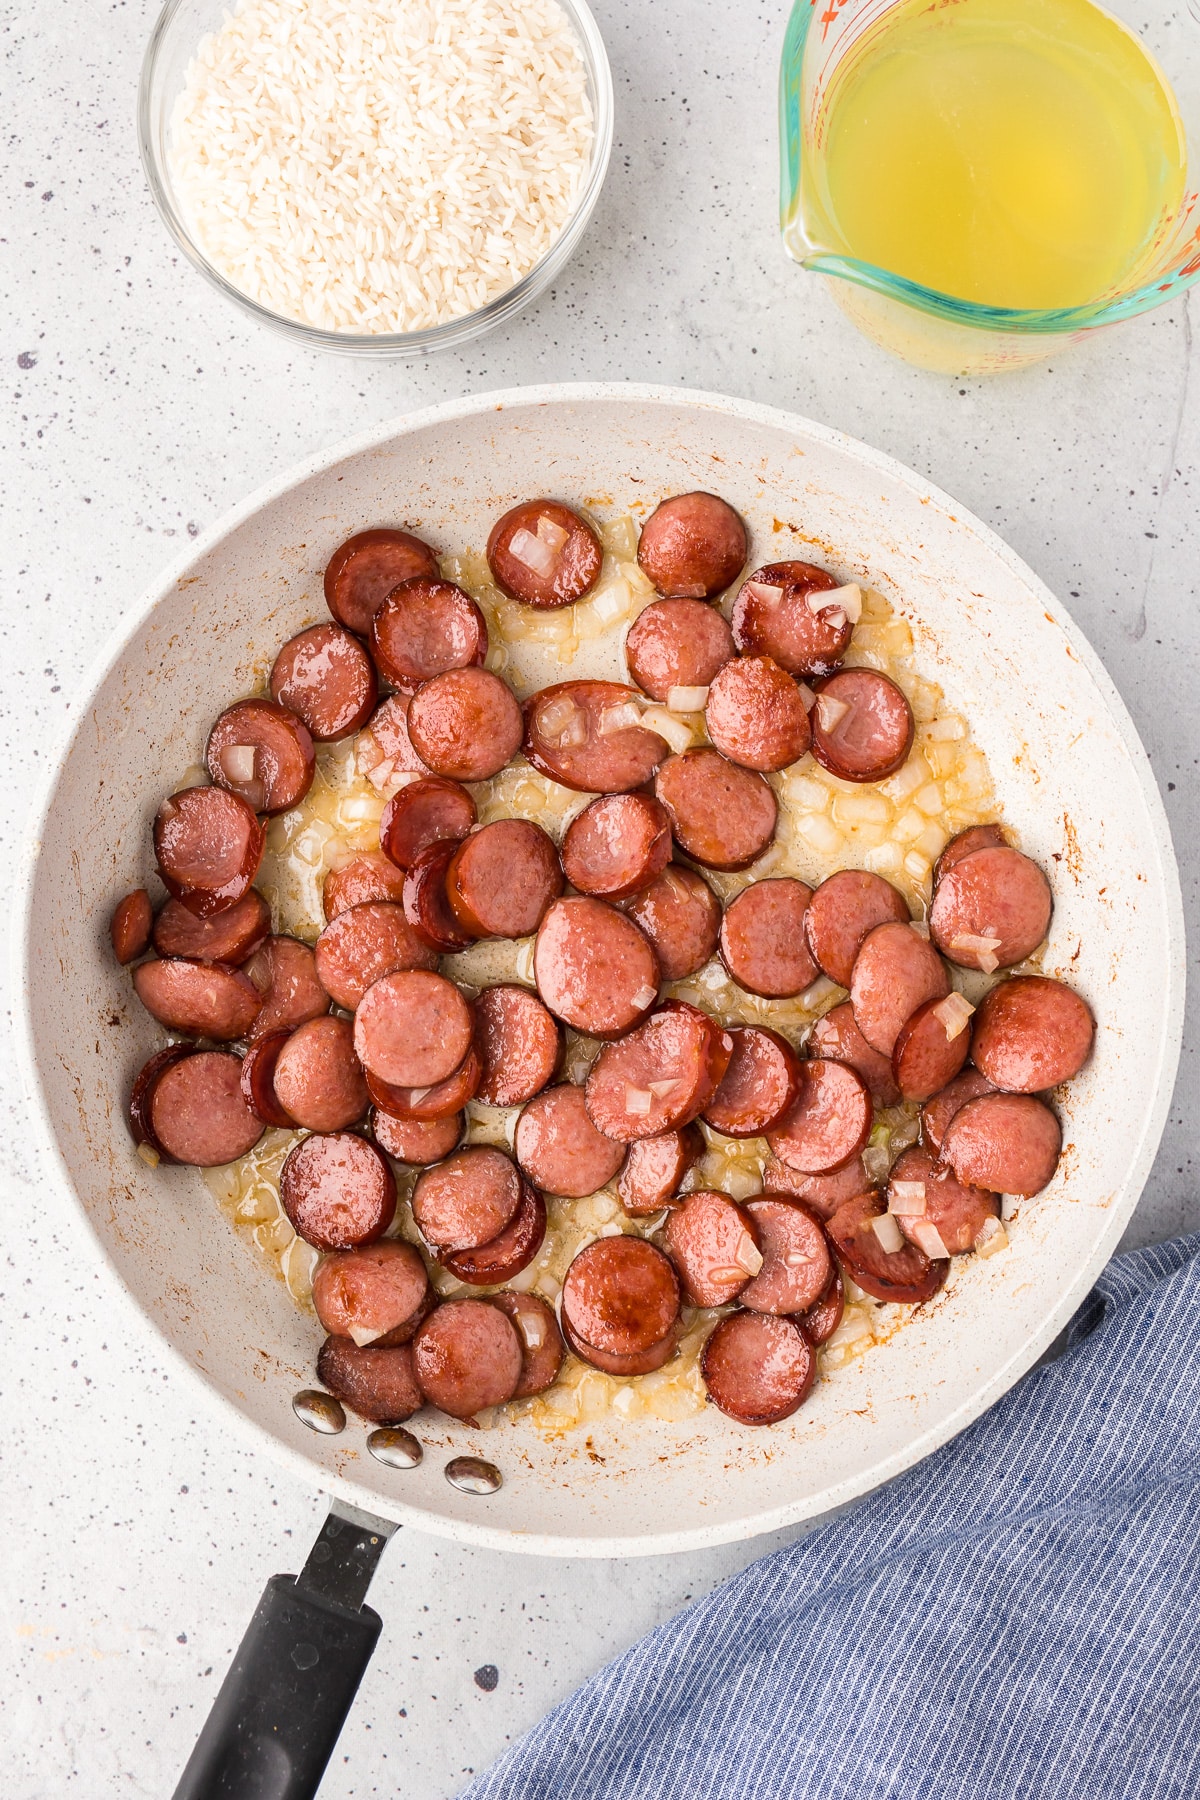 A skillet filled with cooked sausage pieces and onions, with a bowl of rice and a measuring cup of broth on the table nearby.